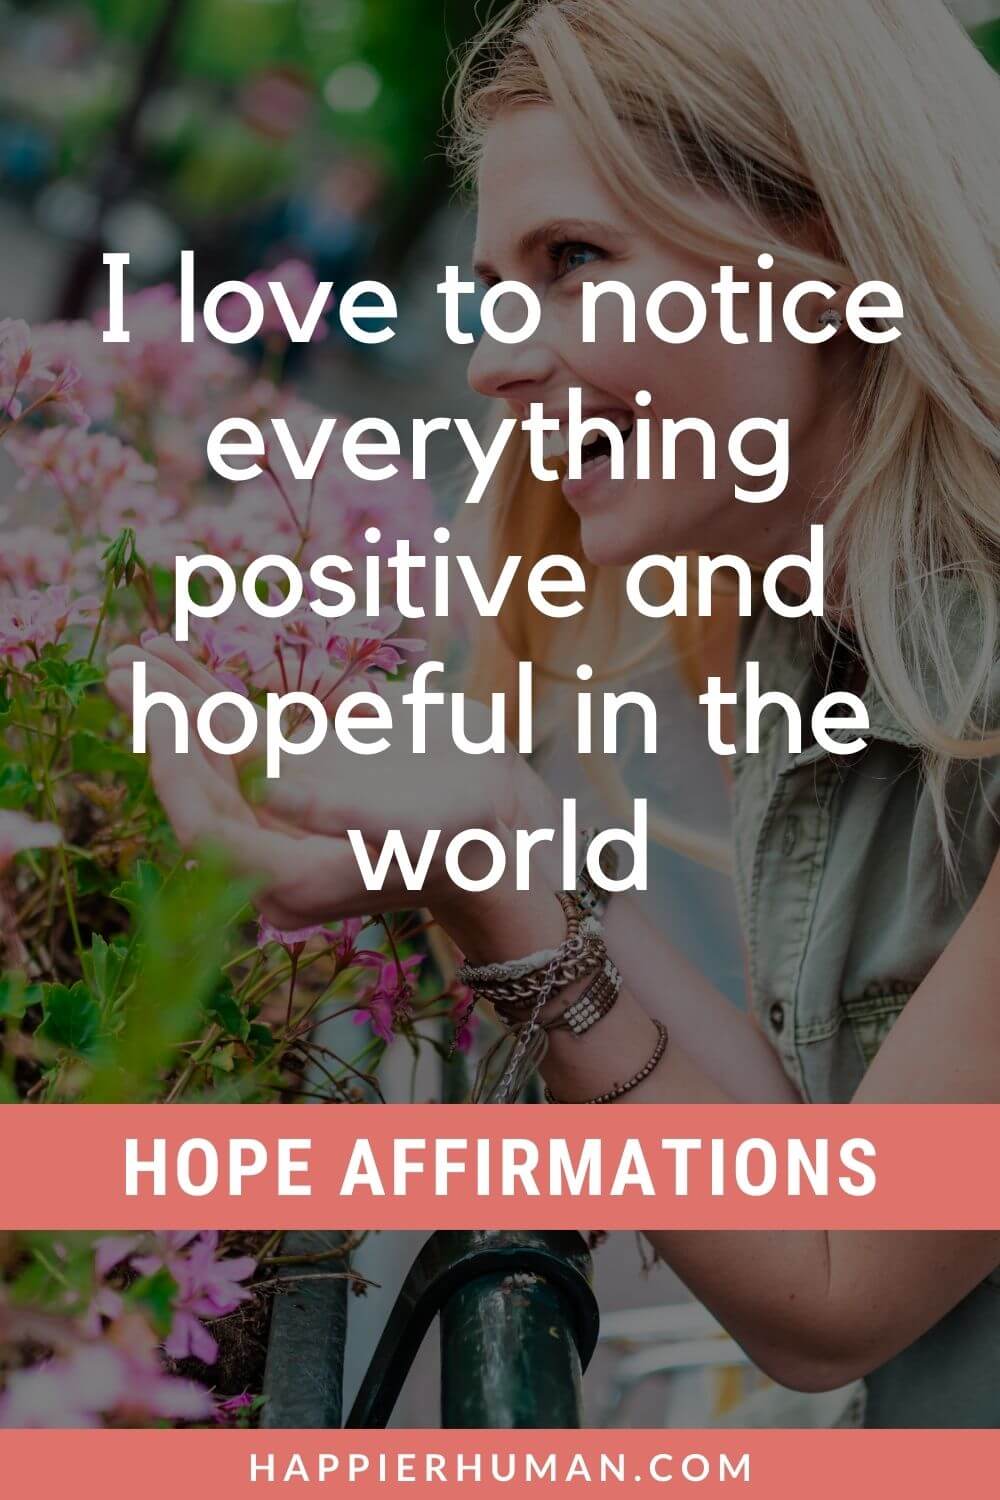 Affirmations for Hope - I love to notice everything positive and hopeful in the world | affirmations for trust in relationships | positive affirmations on hope | affirmations for trusting the universe